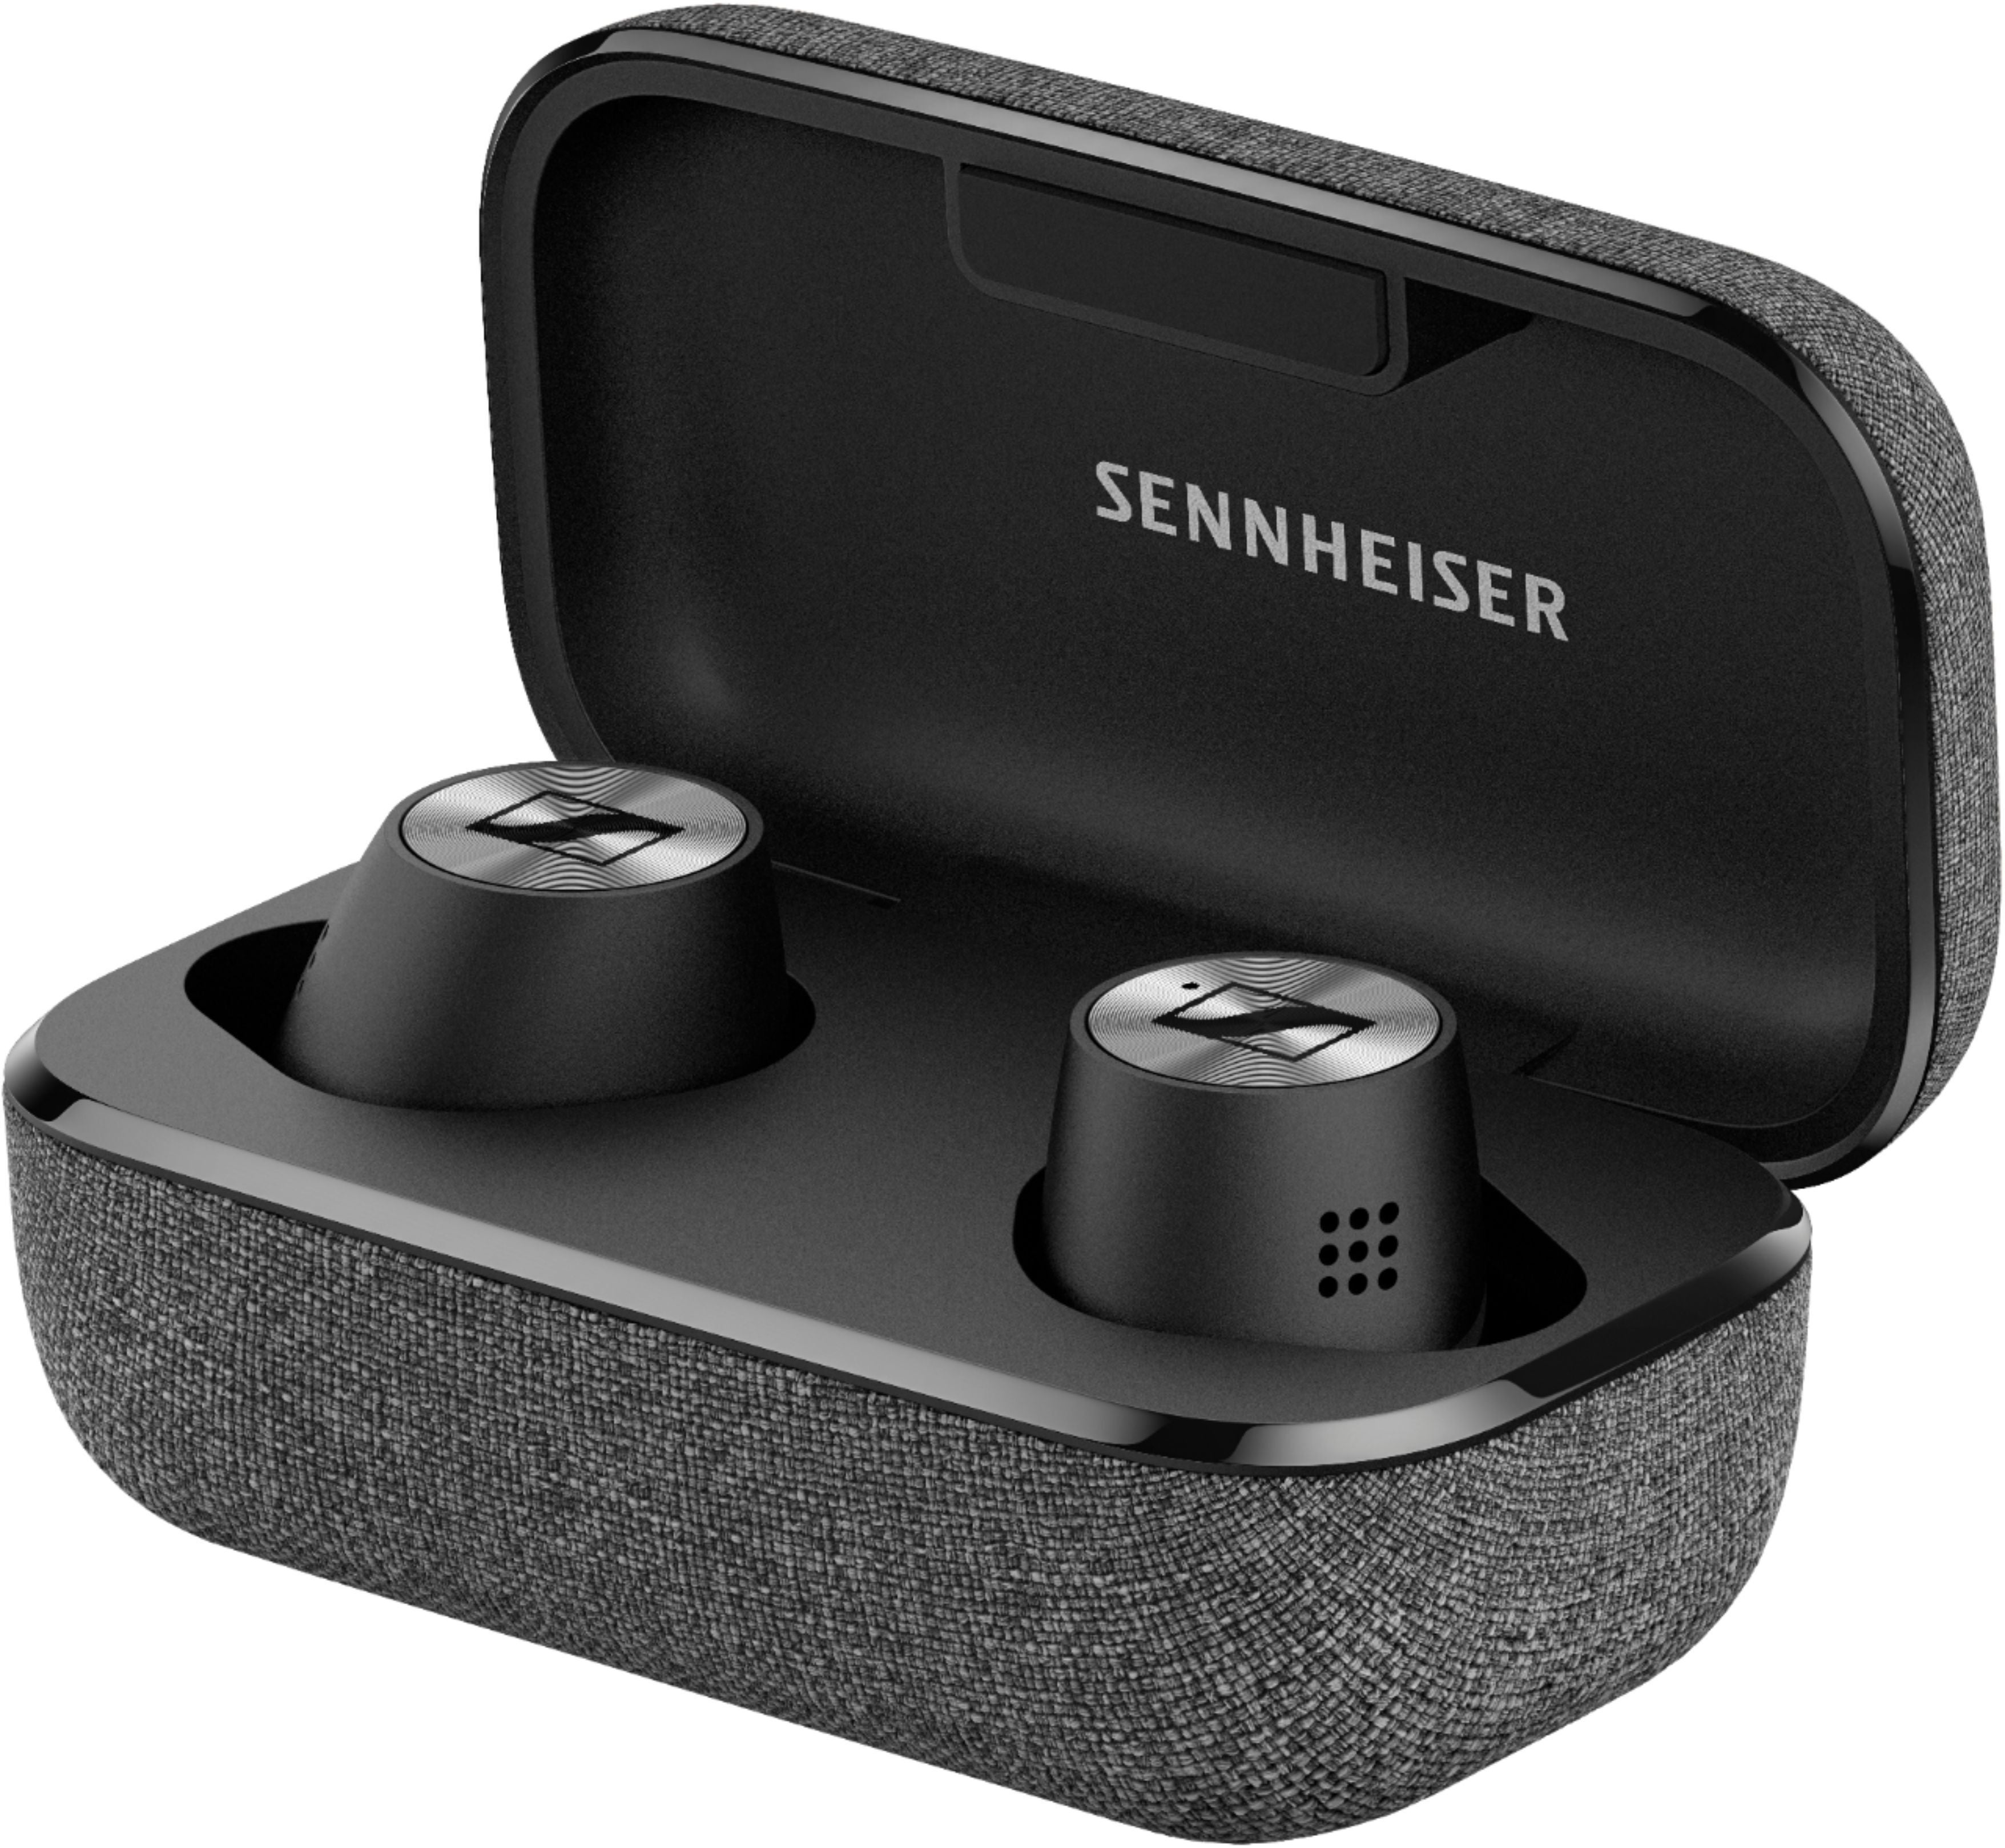 Sennheiser’s premium Momentum 2 earbuds are $100 off for a limited time